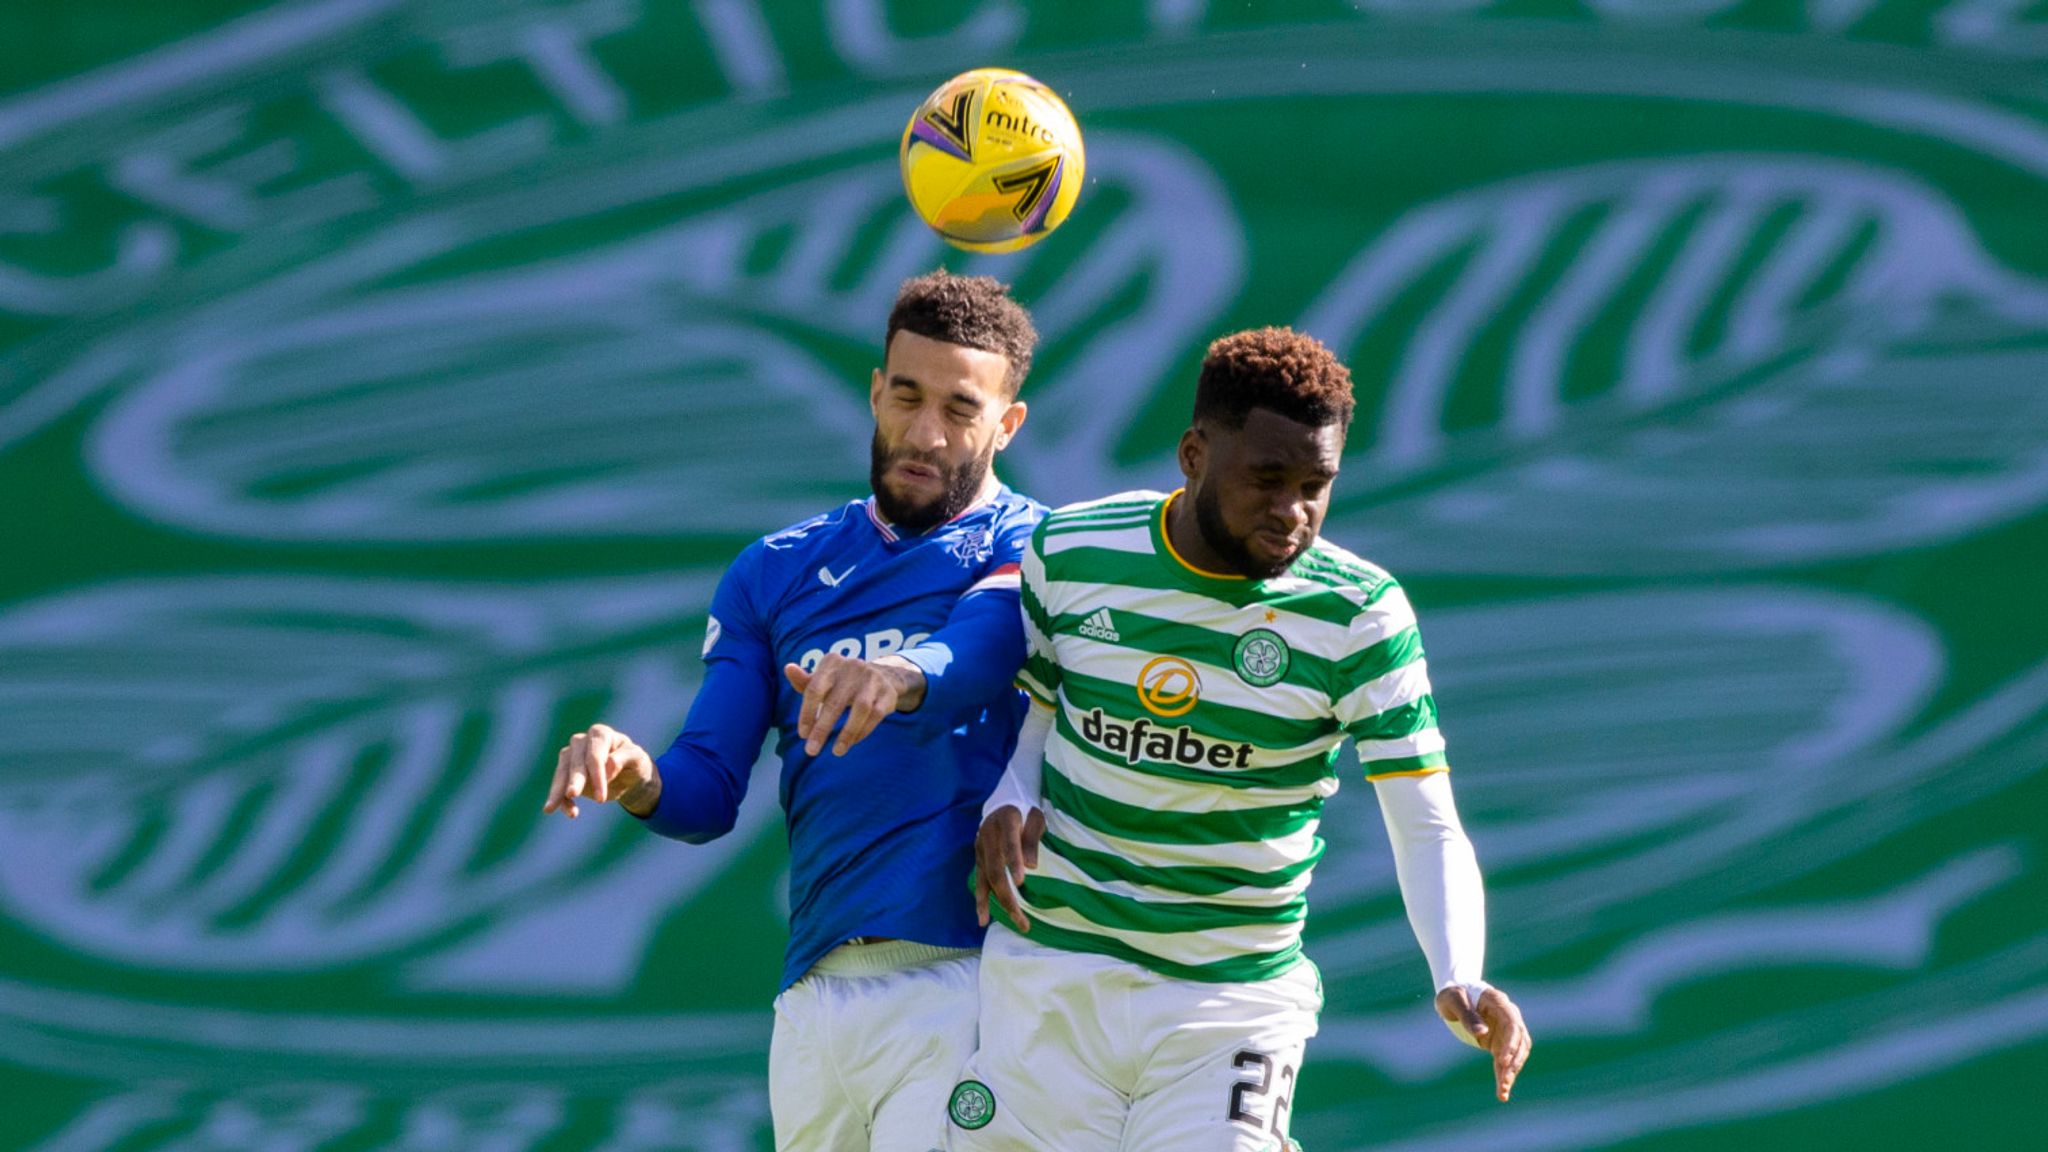 Rangers Vs Celtic Moved To Sunday As Scottish Fixtures Changed To Avoid Prince Philip Funeral Clash Football News Sky Sports [ 1152 x 2048 Pixel ]